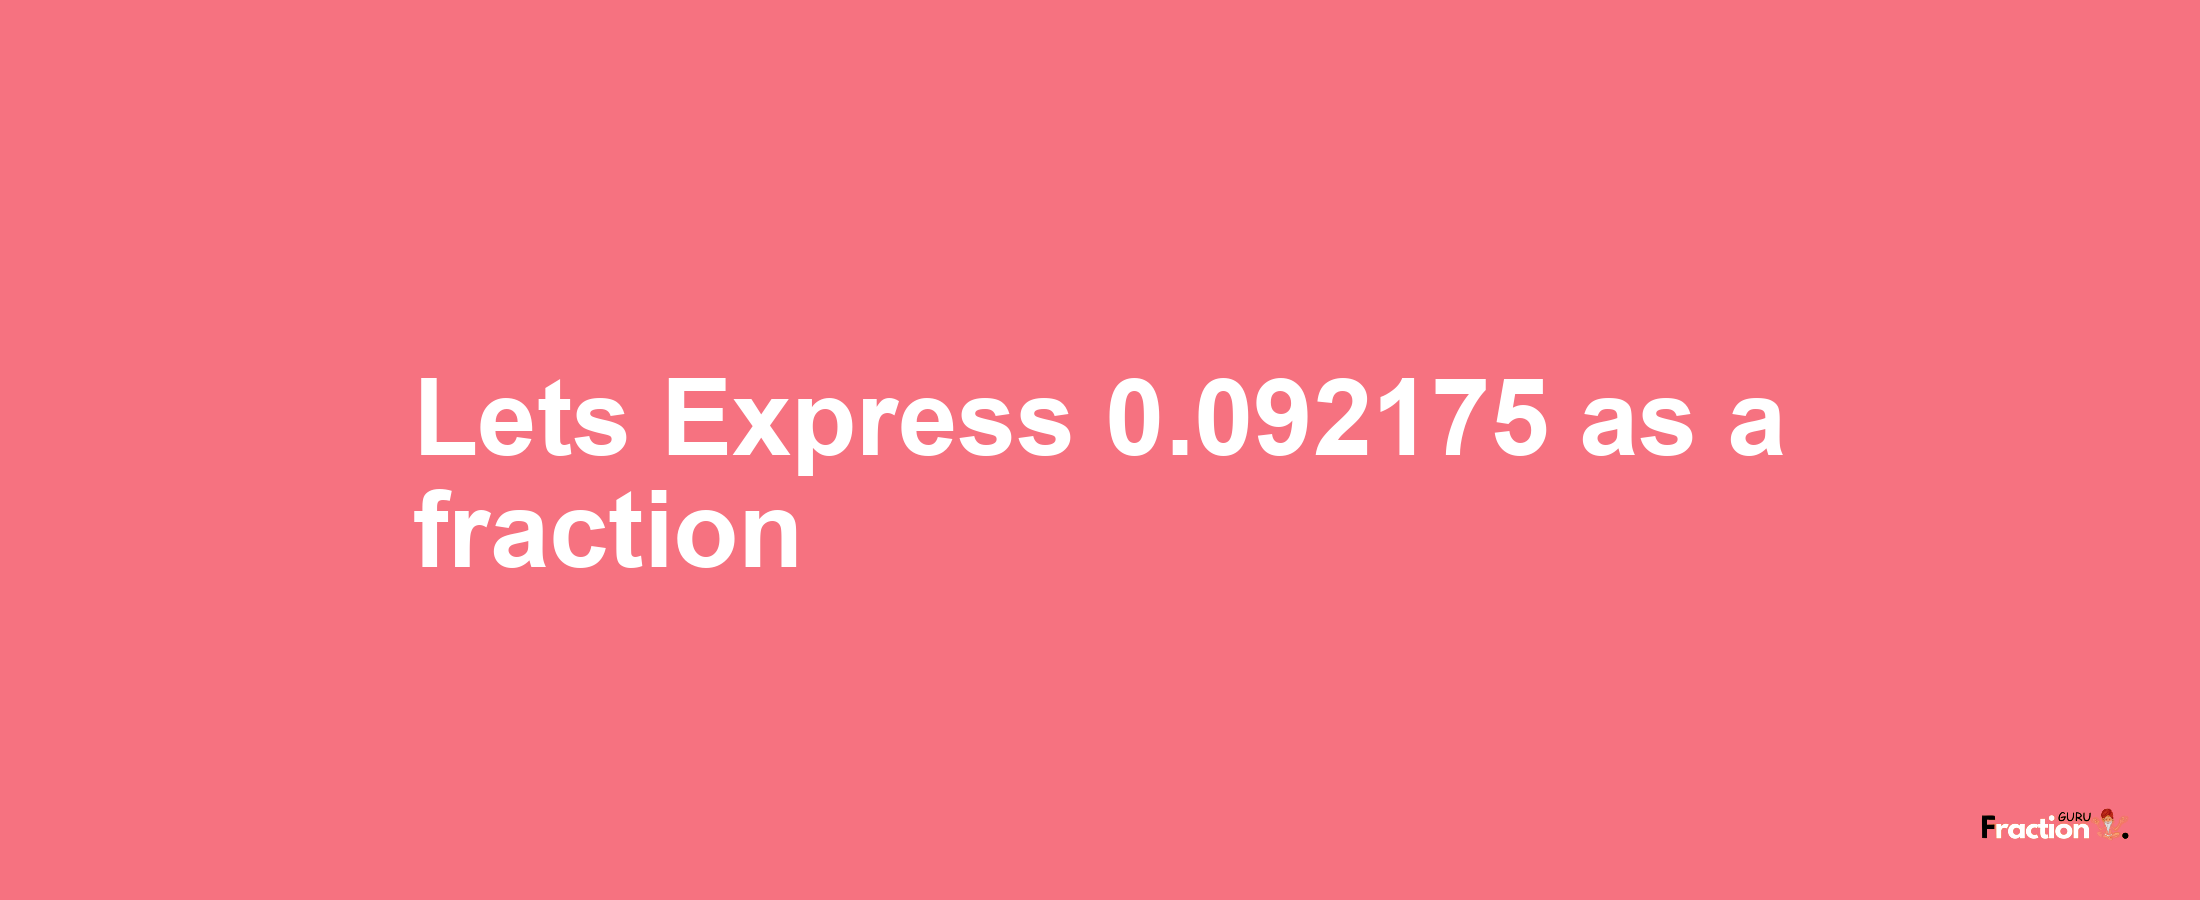 Lets Express 0.092175 as afraction